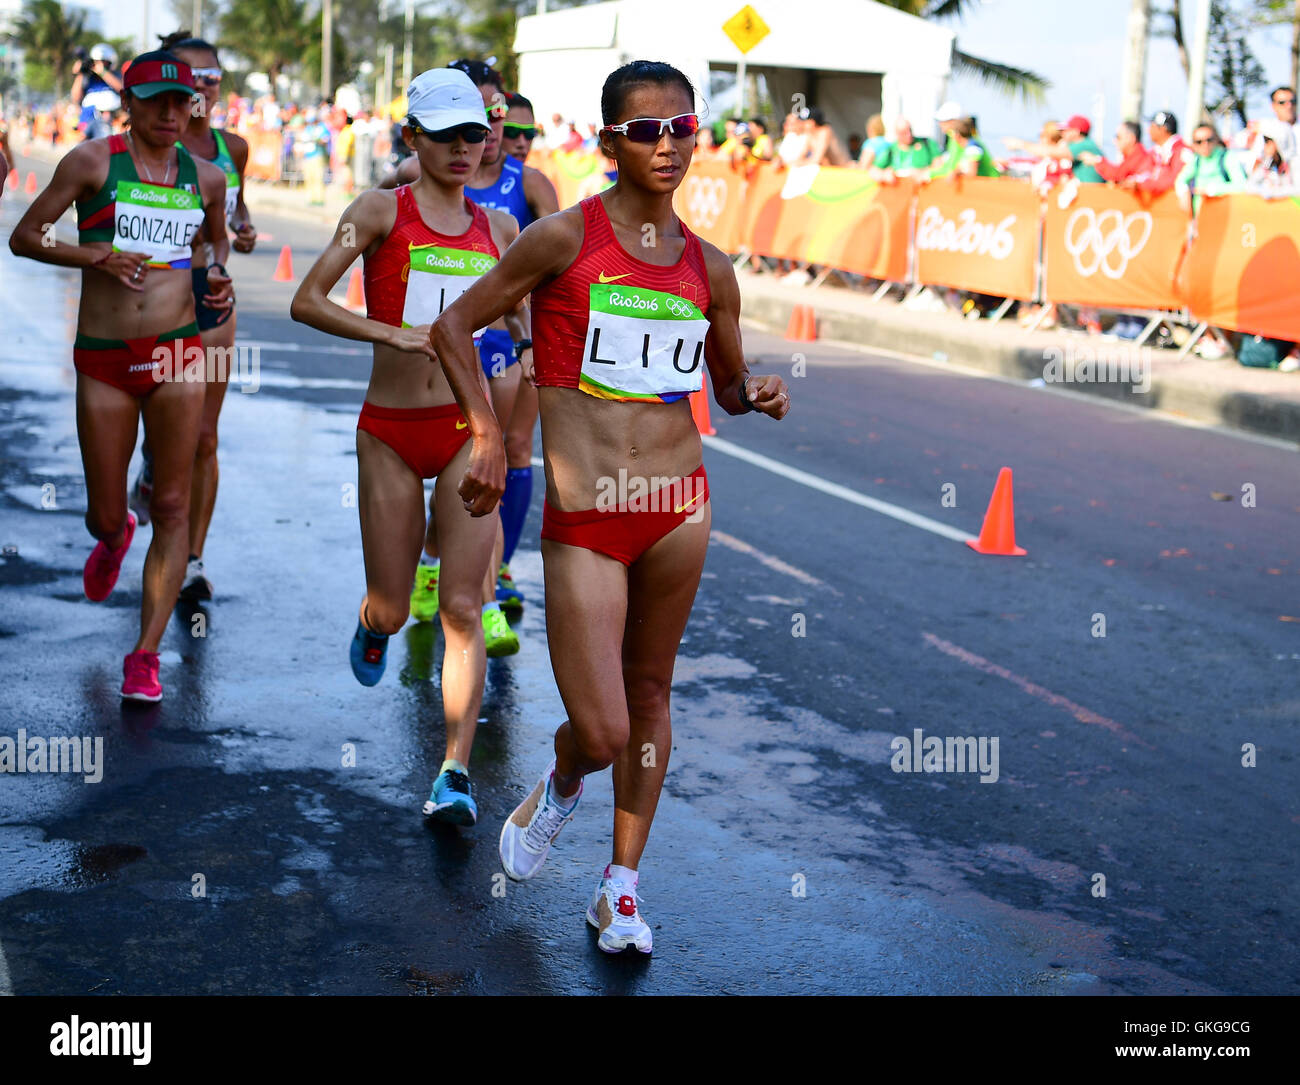 Rio de Janeiro, Brazil. 19th August, 2016. Hong Liu of China during the women's 20km race walk on Day 14 of the 2016 Rio Olympics at Pontal on August 19, 2016 in Rio de Janeiro, Brazil. (Photo by Roger Sedres/Gallo Images) Credit:  Roger Sedres/Alamy Live News Stock Photo